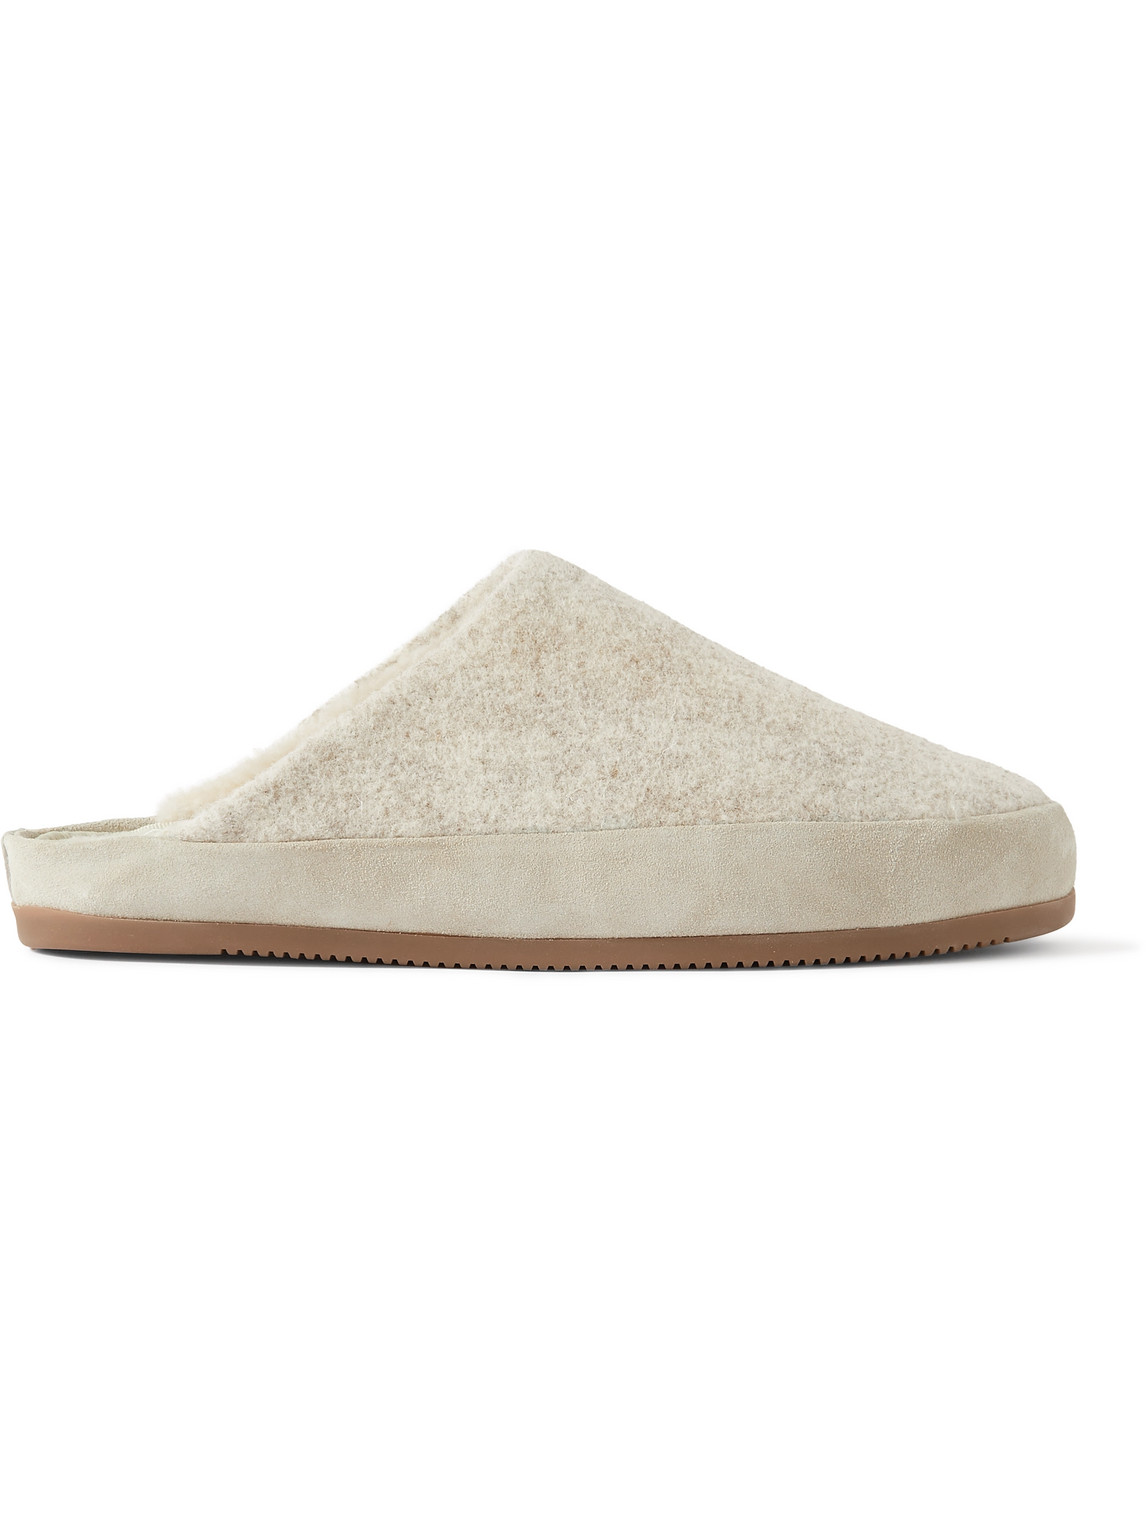 Mulo - Suede-Trimmed Shearling-Lined Recycled Wool Slippers - Men - White - UK 7 von Mulo